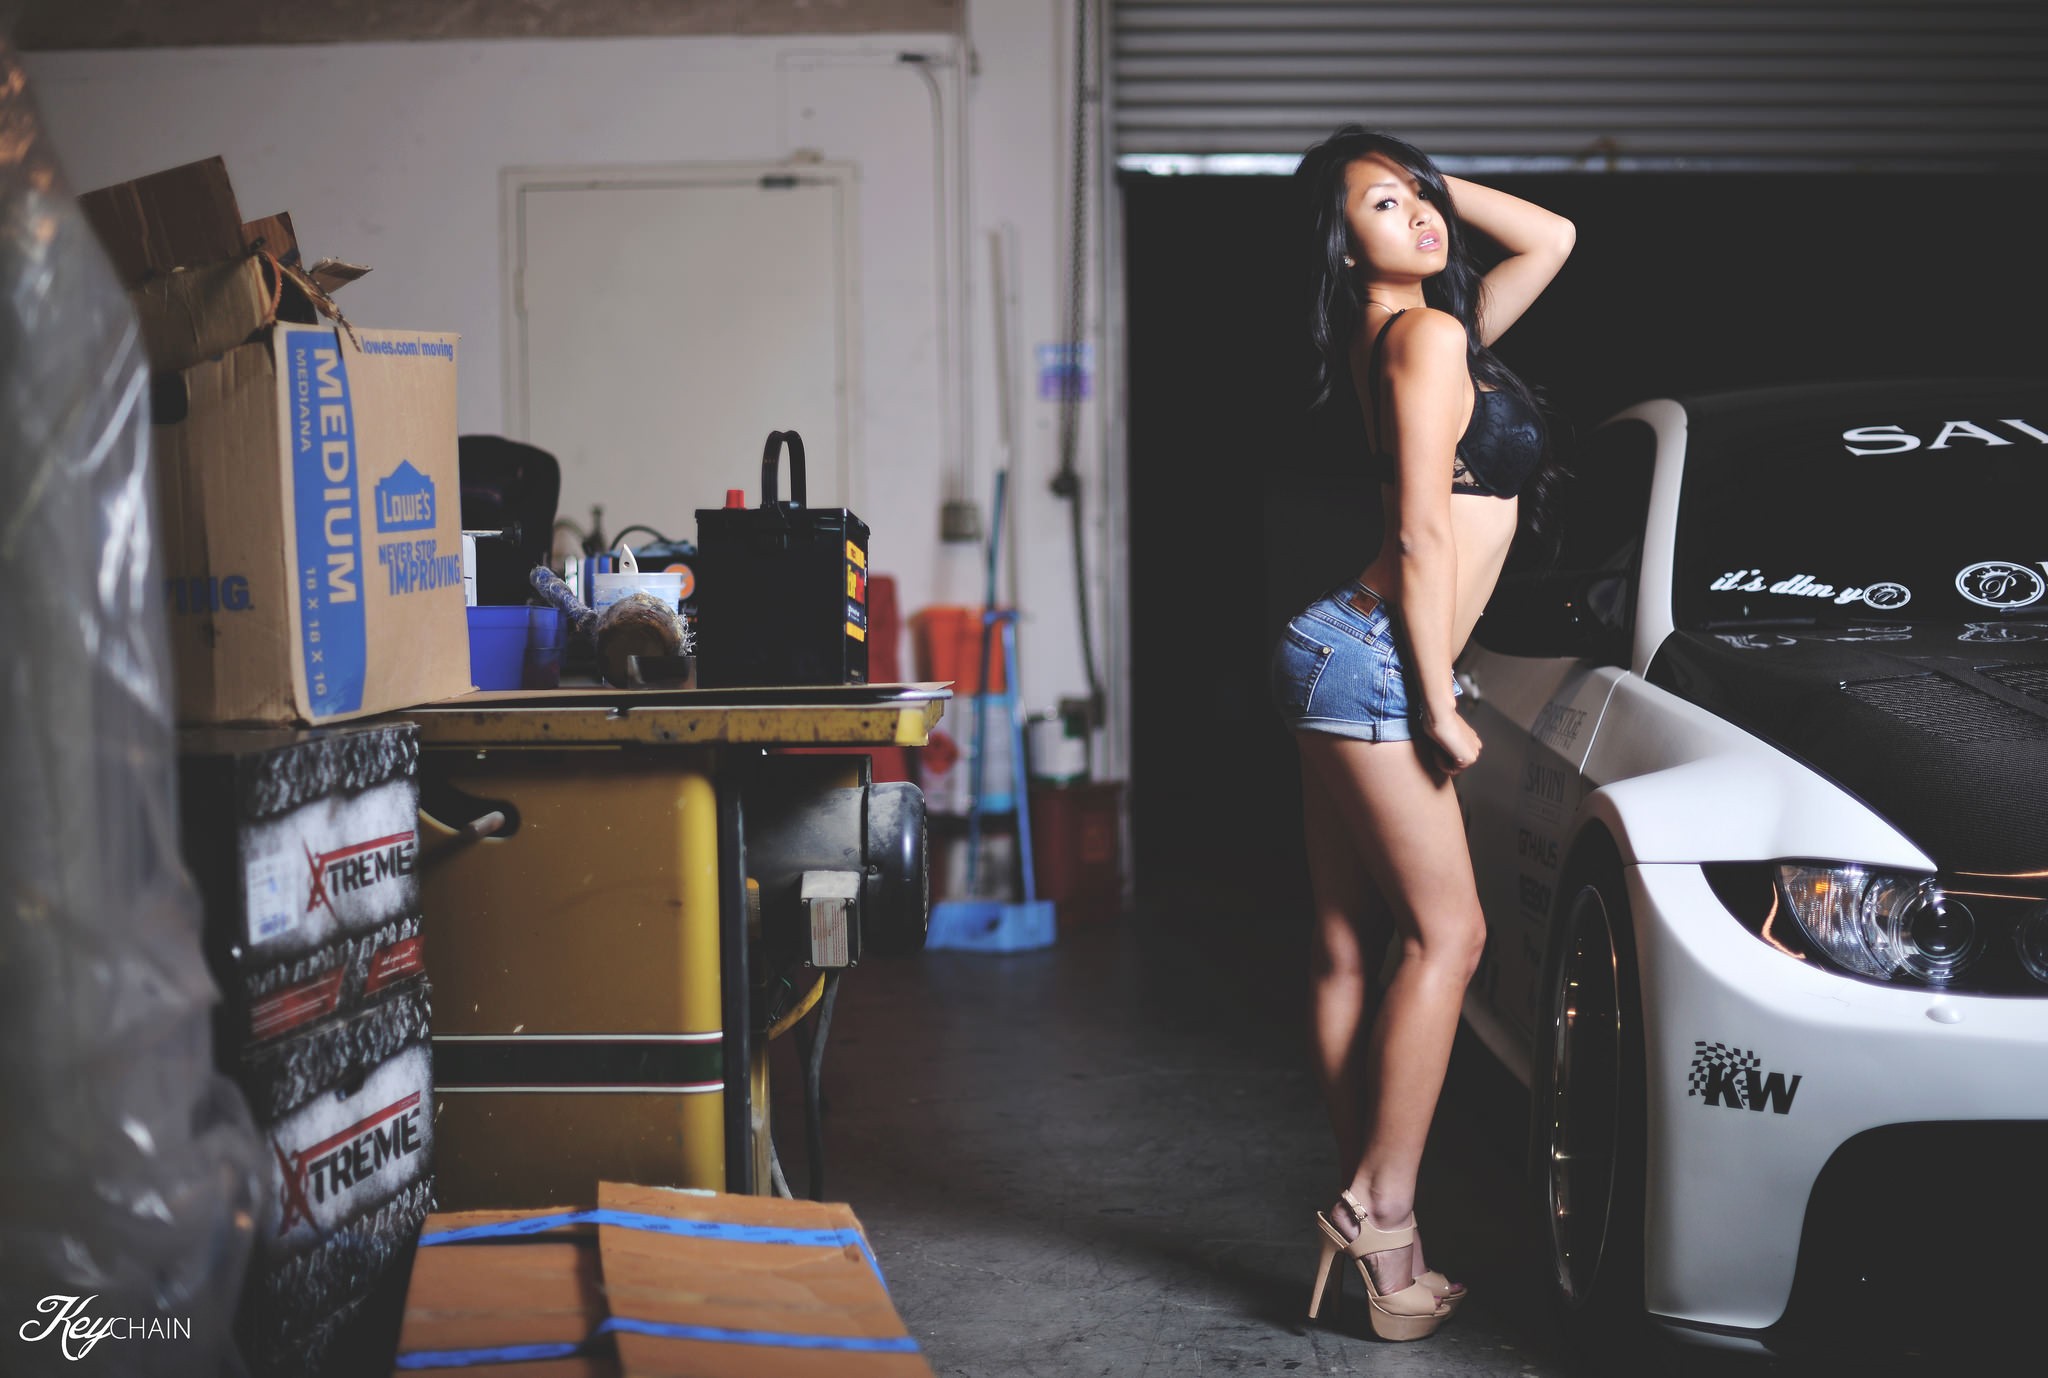 People 2048x1378 women Asian black bras jean shorts high heels car hands in hair BMW ass Christy Truong BMW E92 BMW 3 Series women with cars heels dark hair standing vehicle looking at viewer Key Chain